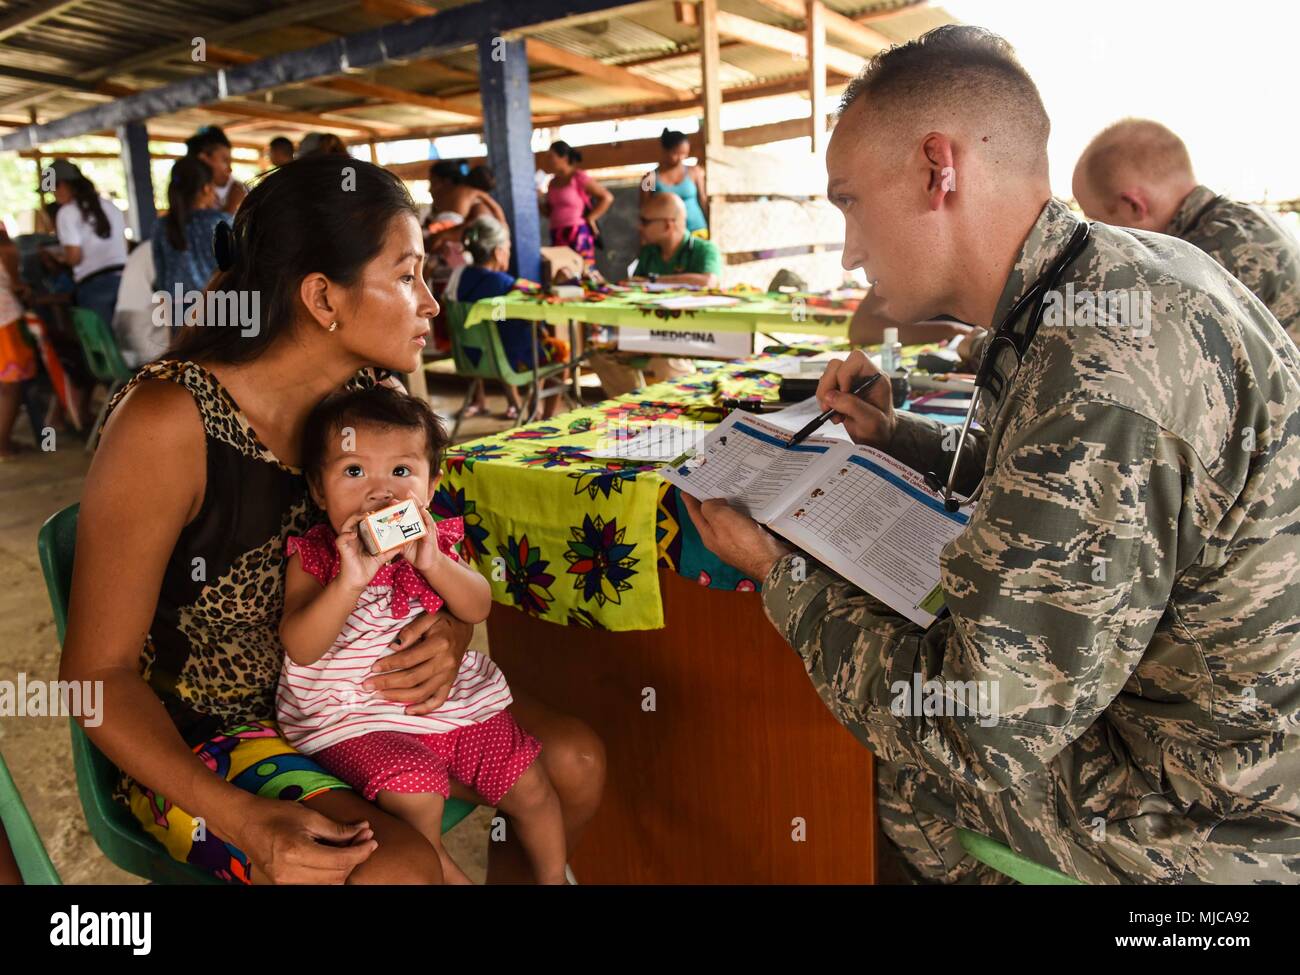 U.S. Air Force Capt. Charles Hutchings, 346th Expeditionary Medical Operations Squadron pediatrician, explains info to a local woman near Meteti, Panama, April 17, 2018. Hutchings was part of an Embedded Health Engagement Team, which gave him a unique learning experience by submerging him into local clinics. The team was participating in Exercise New Horizons 2018, which will assist communities throughout Panama by providing medical assistance and building facilities such as schools, a youth community center and a women’s health ward. (U.S. Air Force photo by Senior Airman Dustin Mullen/Releas Stock Photo